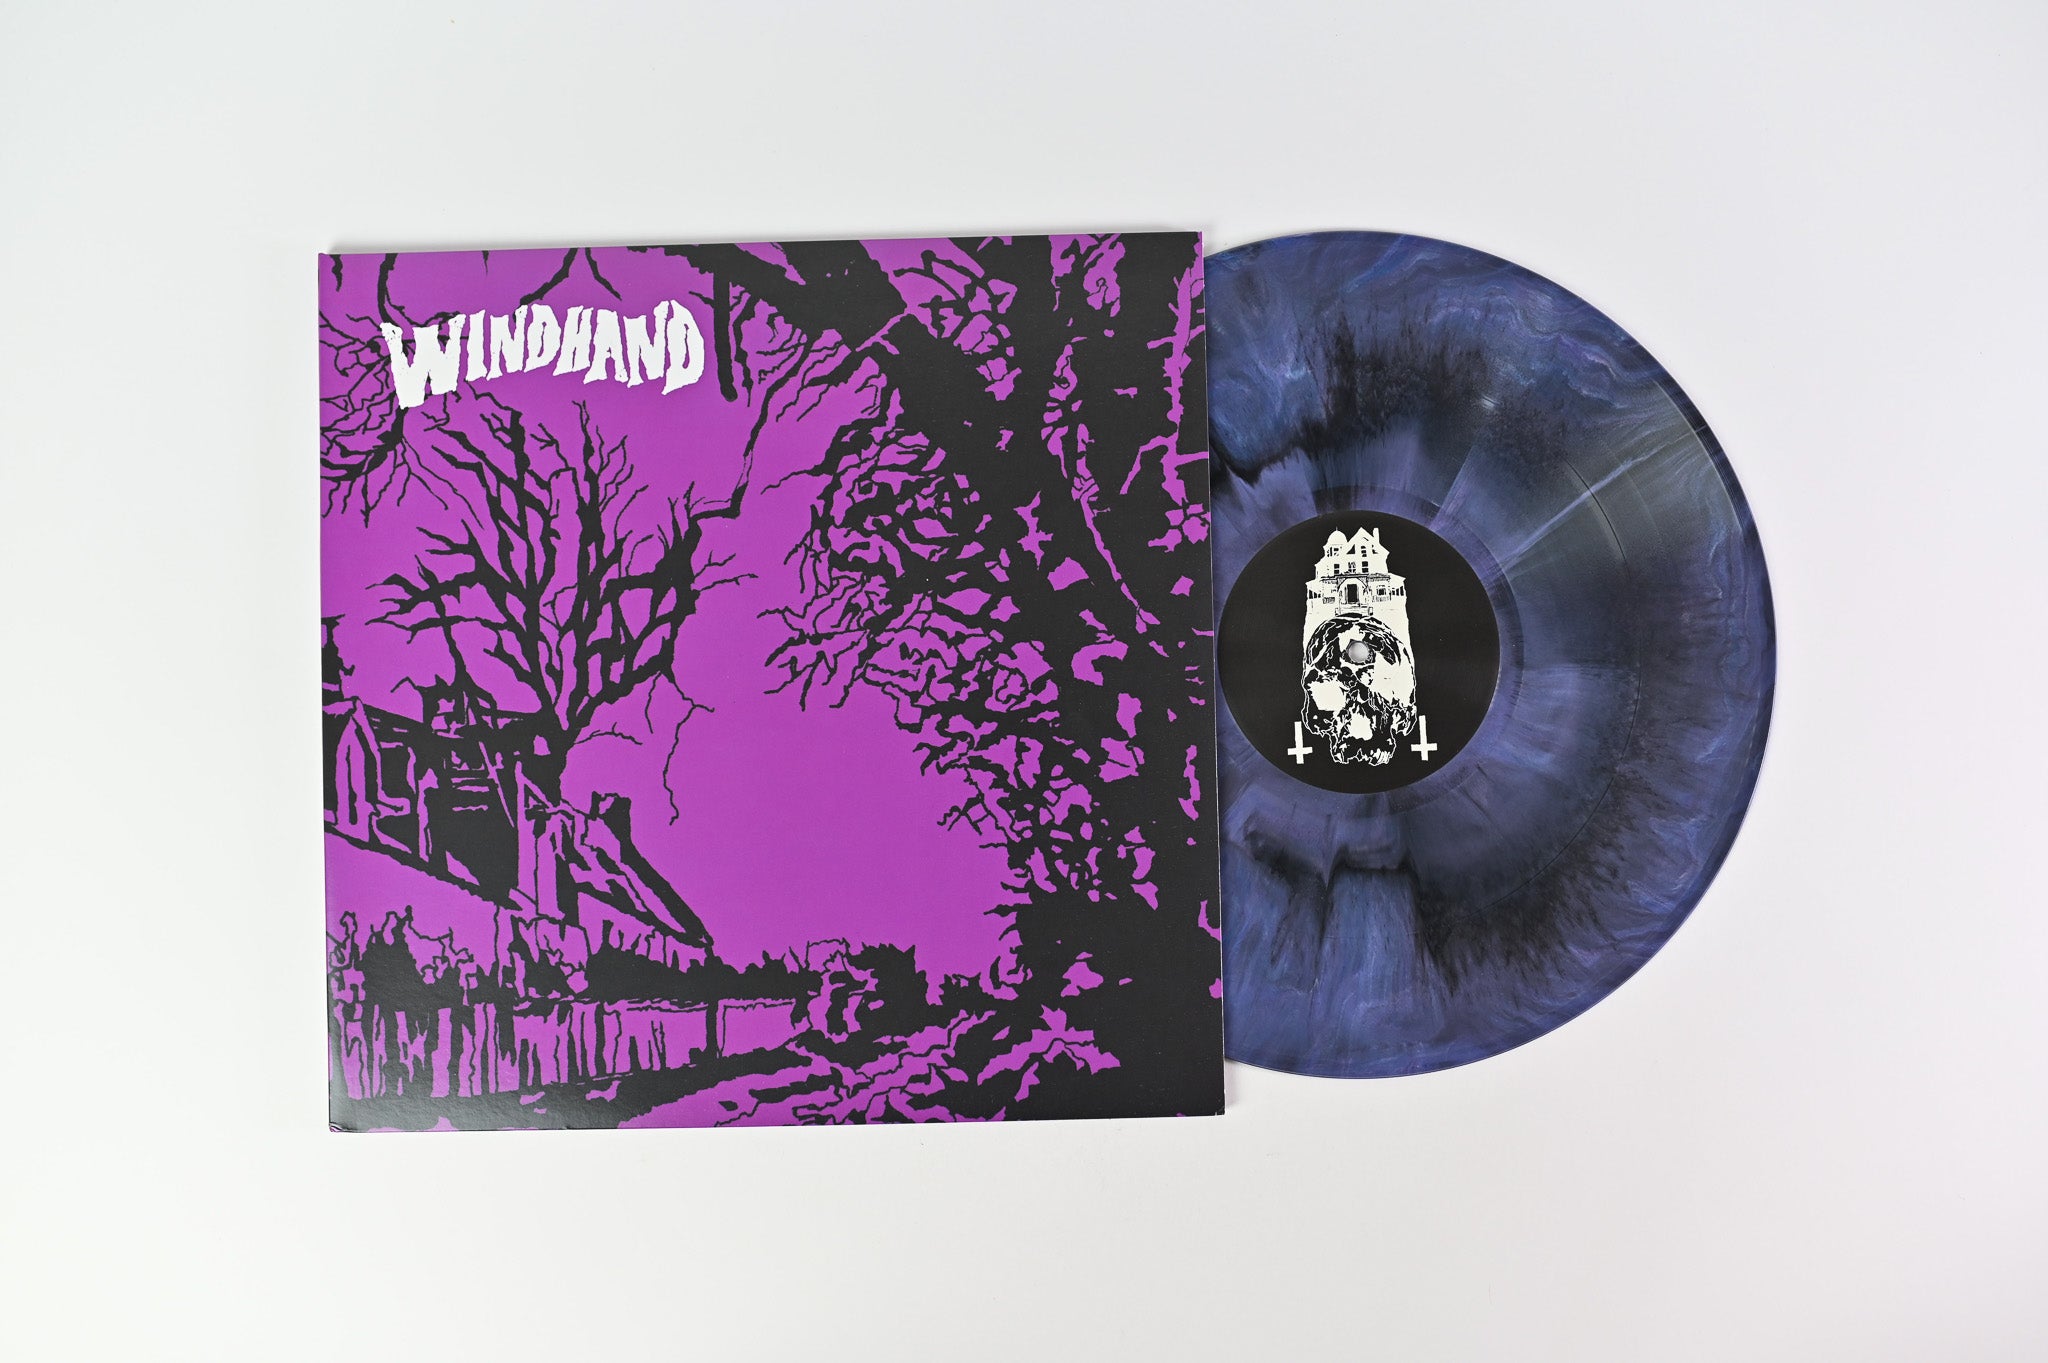 Windhand - Windhand on Forcefield Ltd Black / Purple Marbled